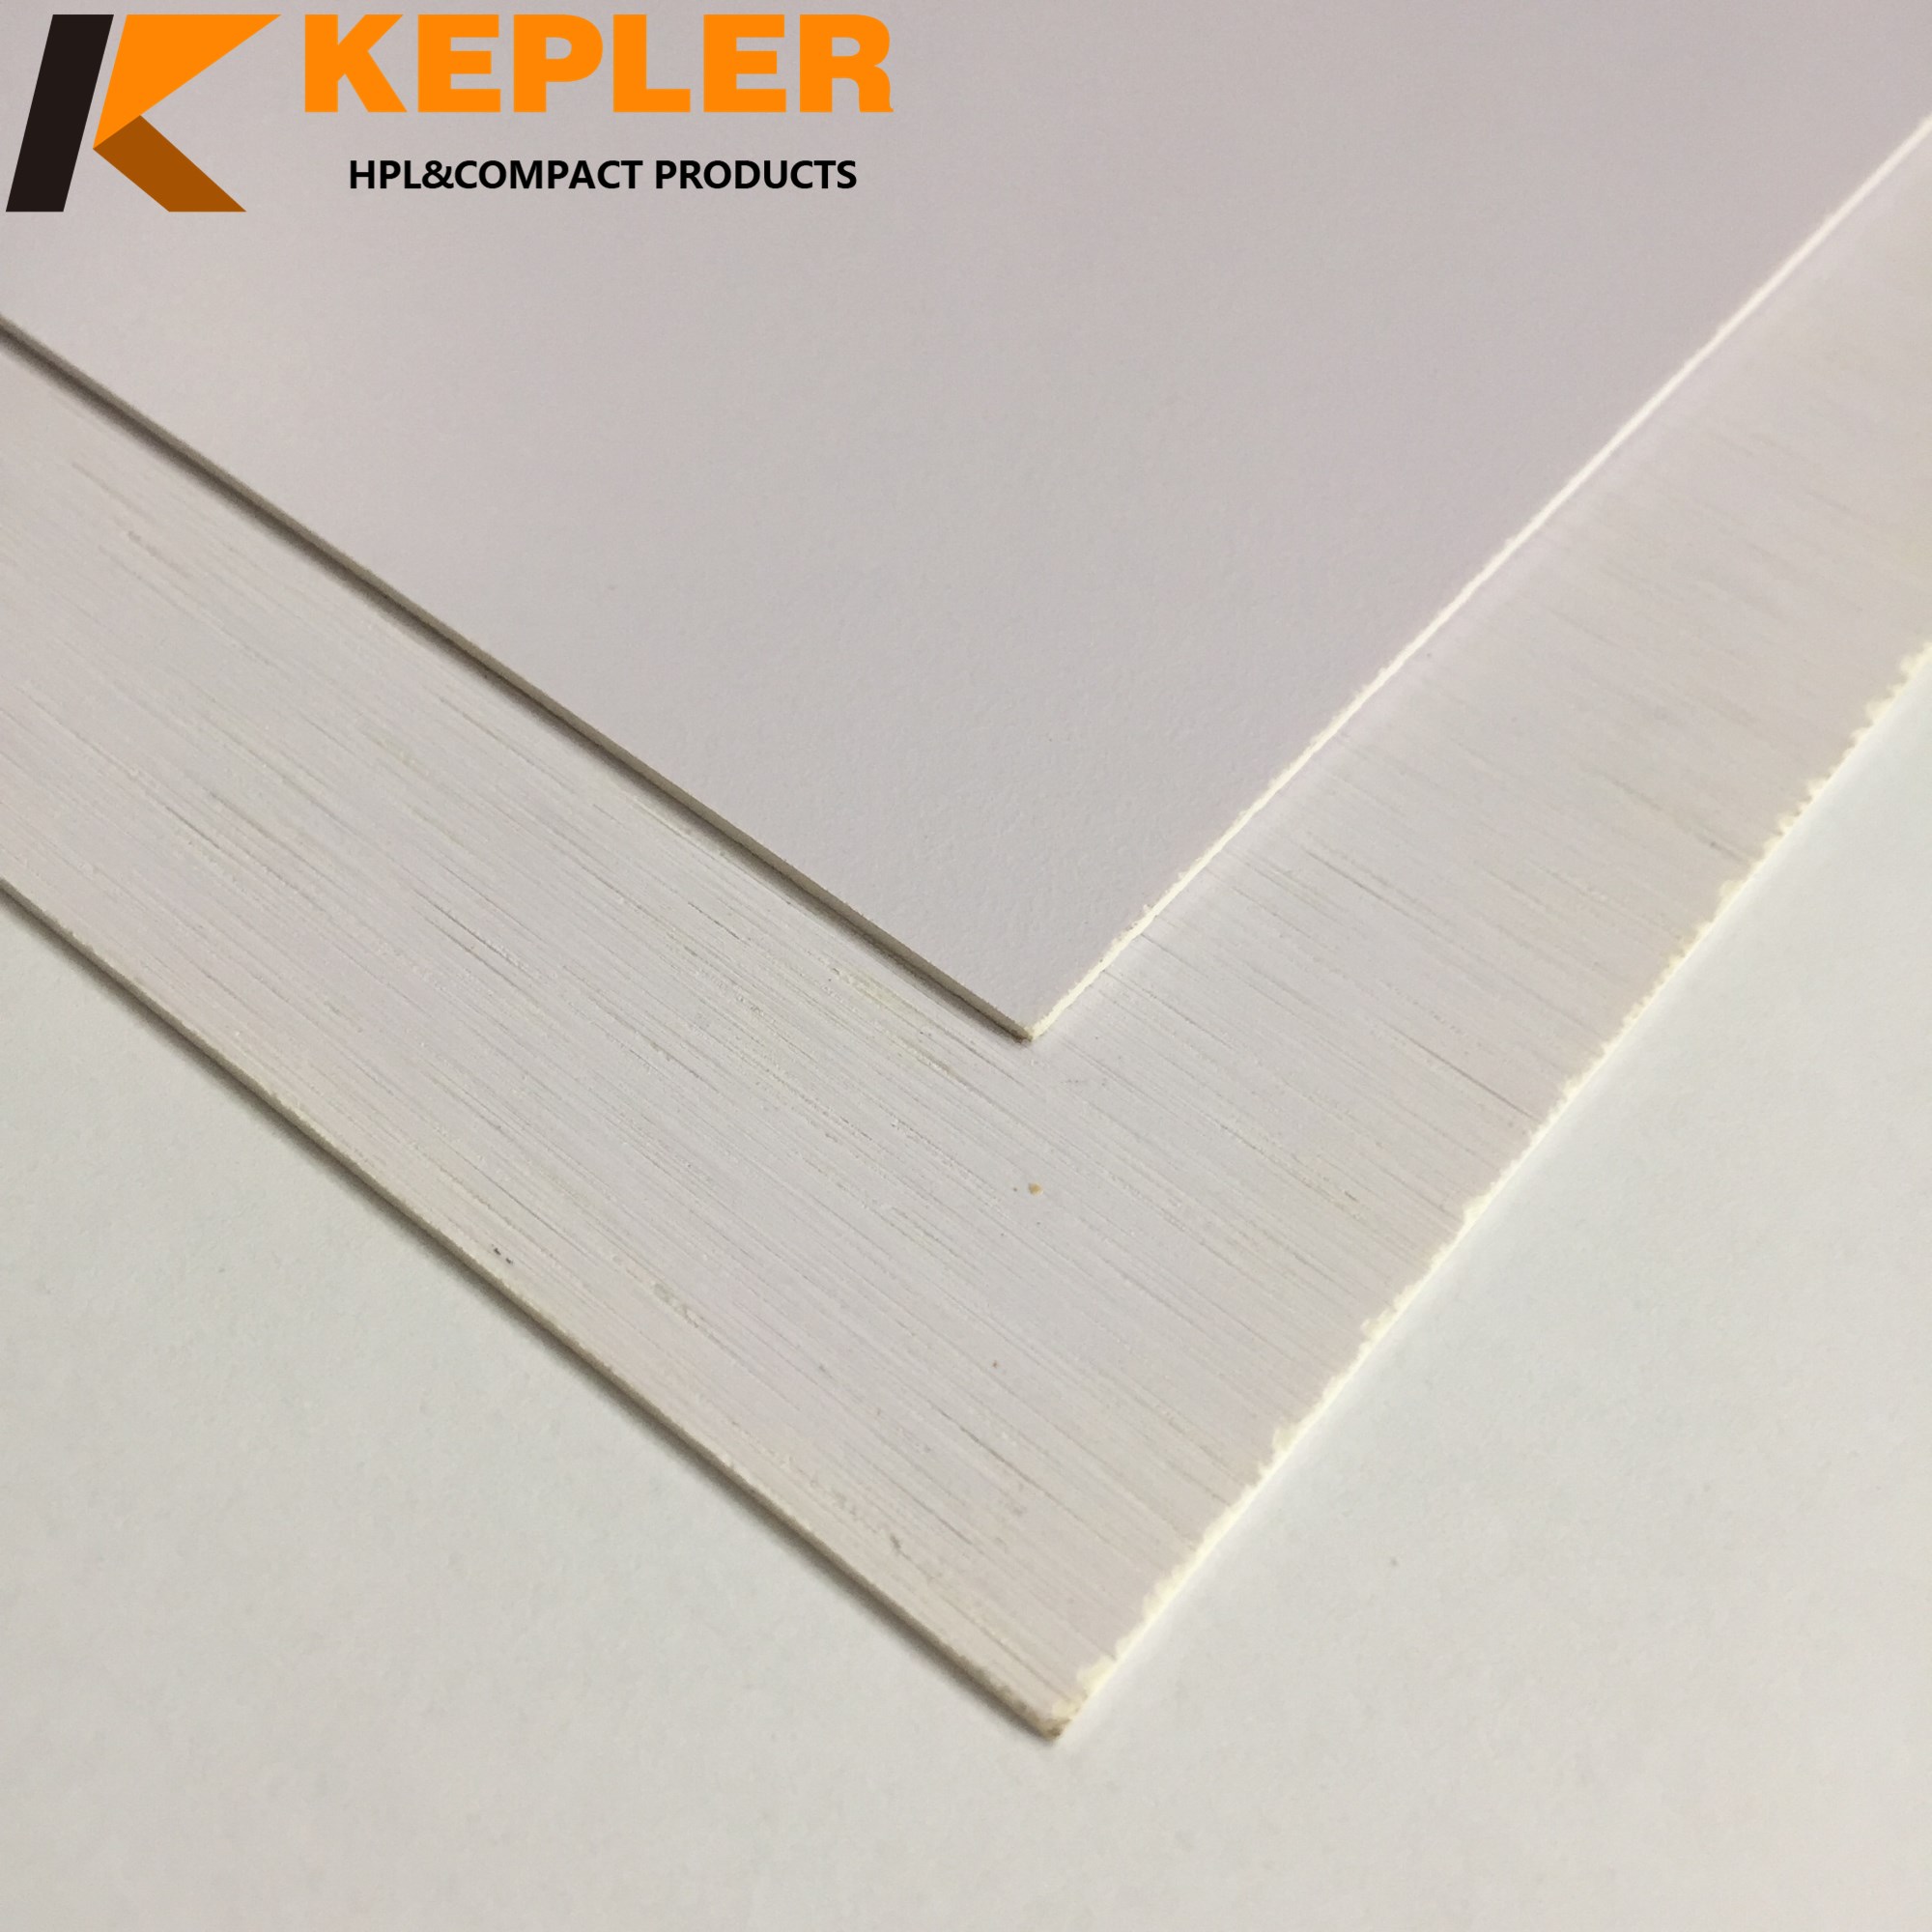 Kepler decorative waterproof durable 1.3mm thickness white color solid core hpl compact laminate panel manufacturer 